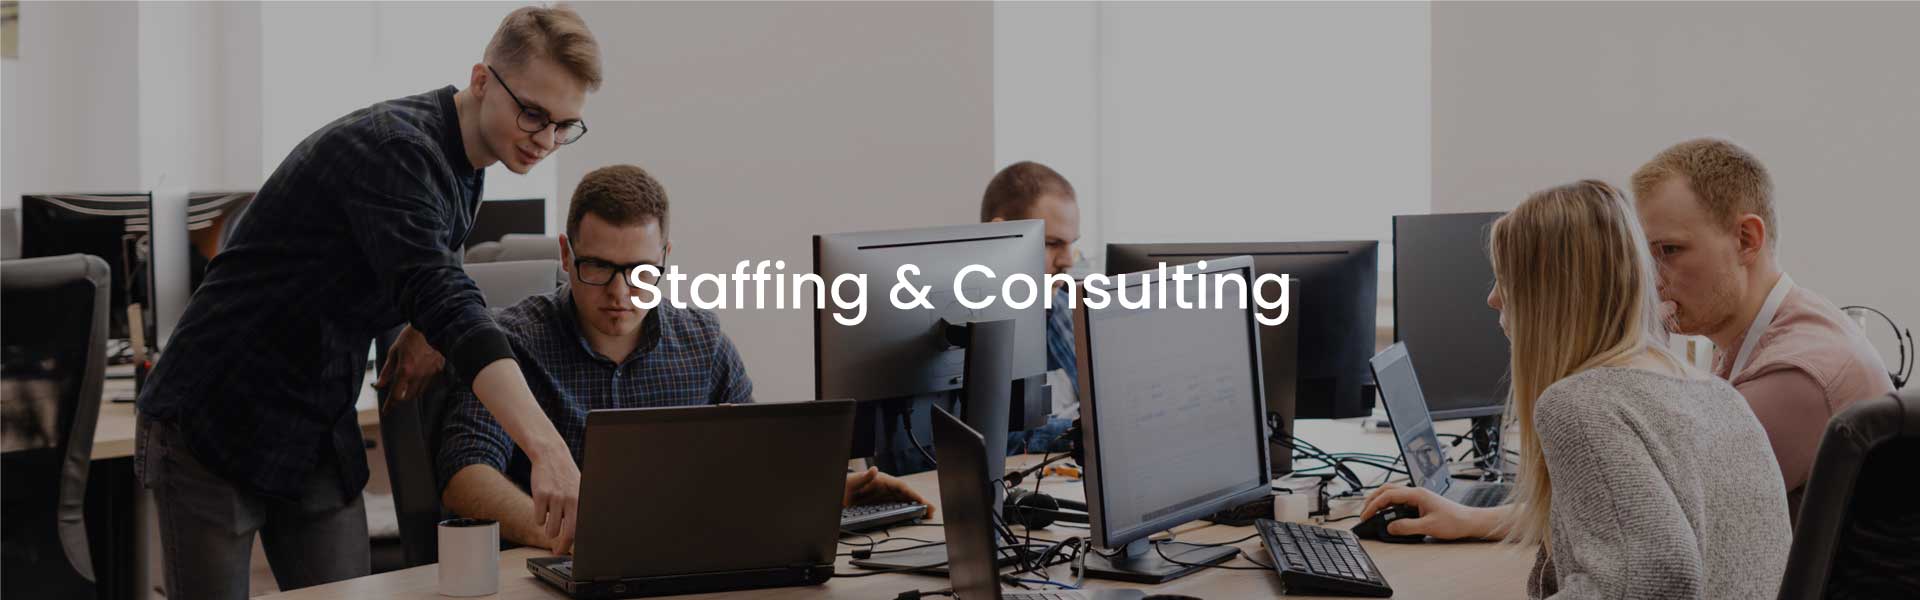 Trigyn’s Staffing and Consulting Experience